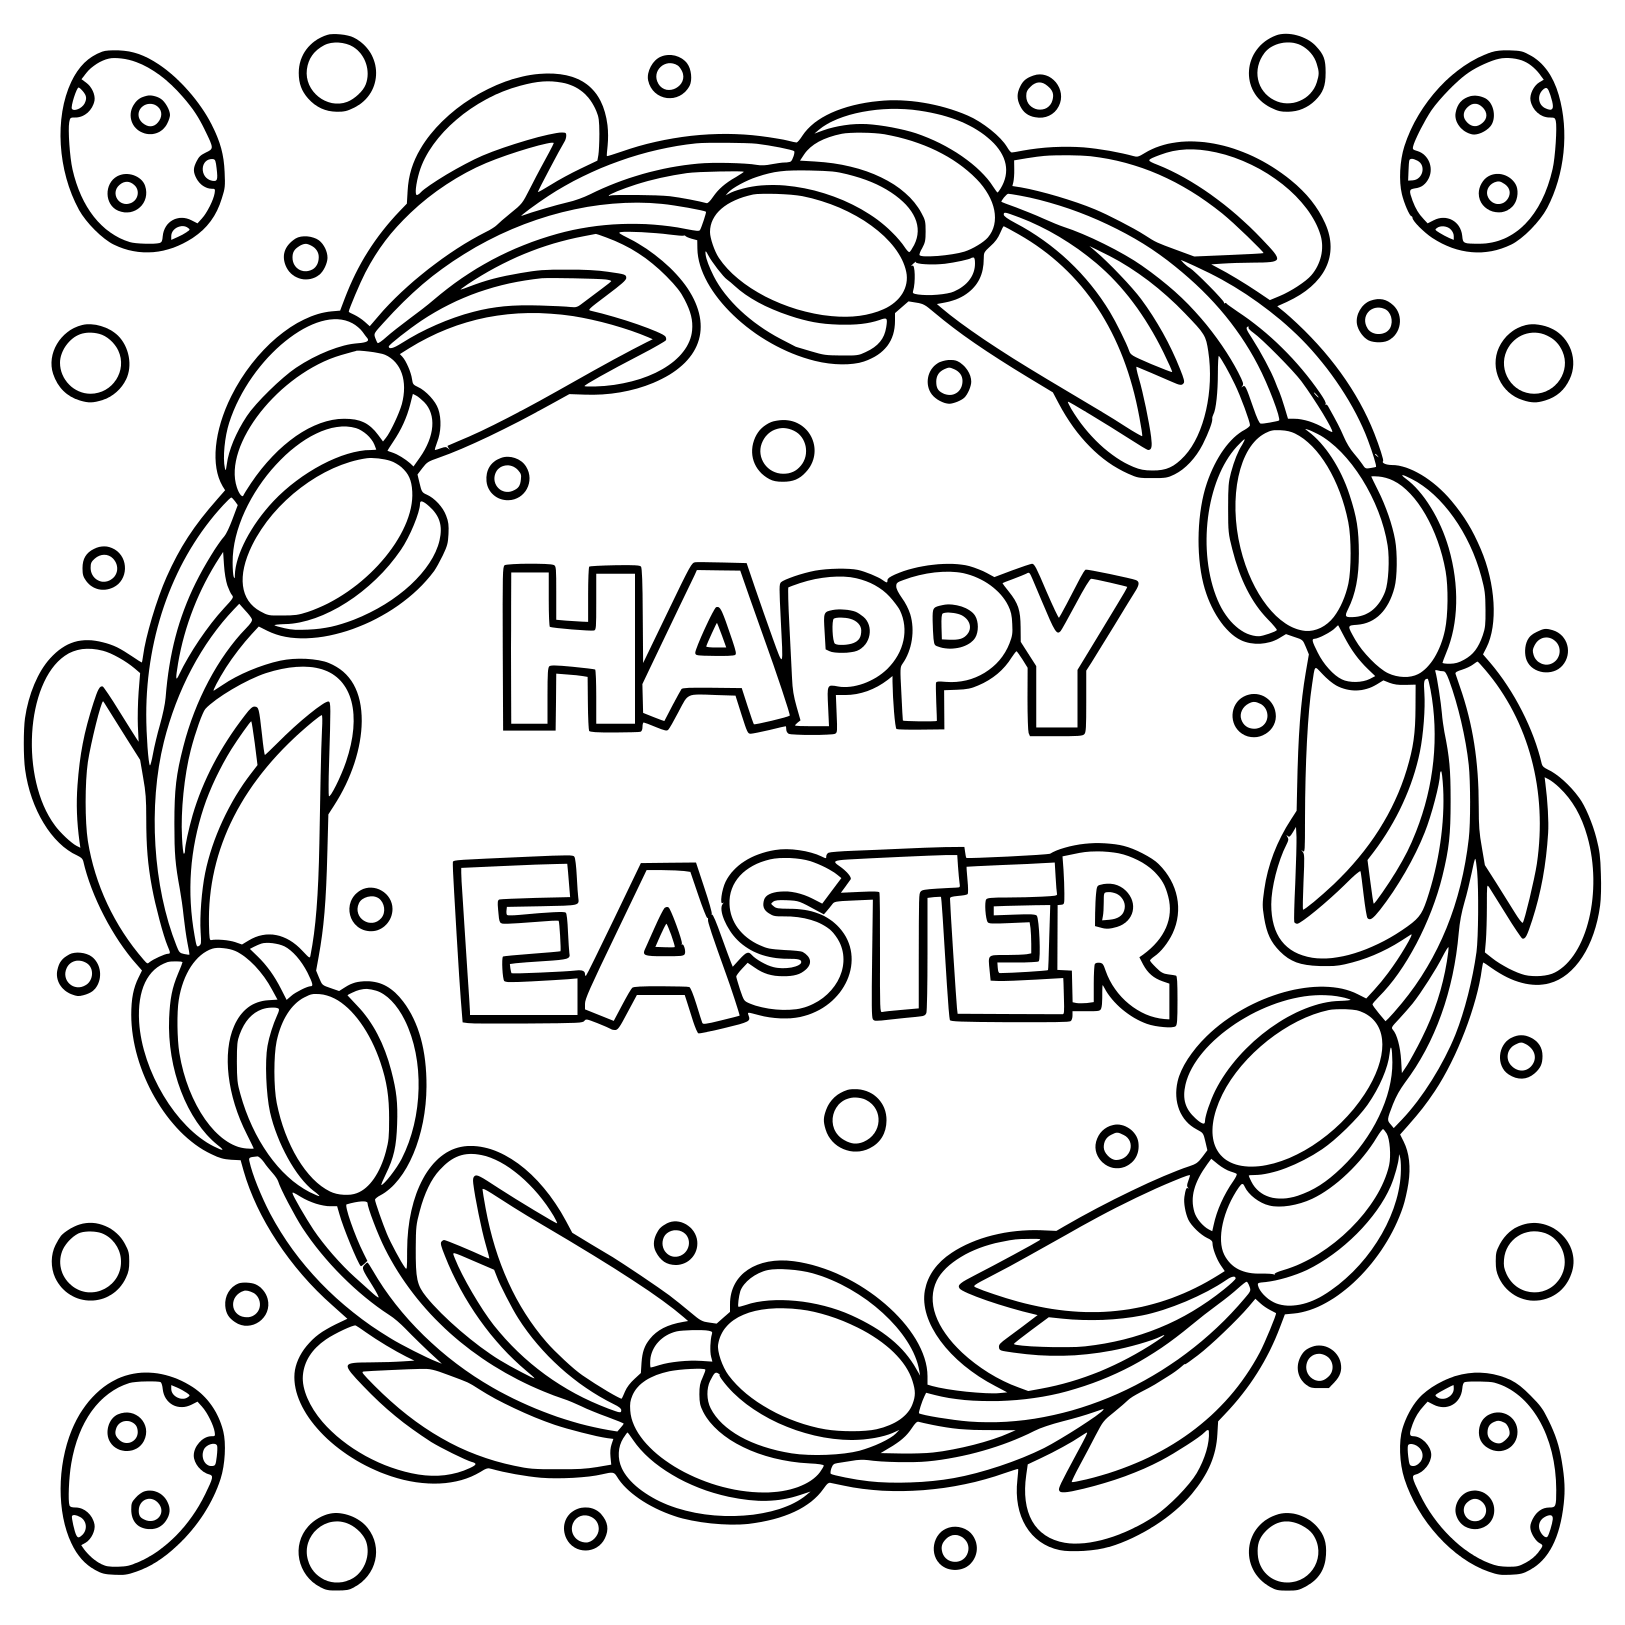 Happy Easter Black And White Illustration Coloring Page